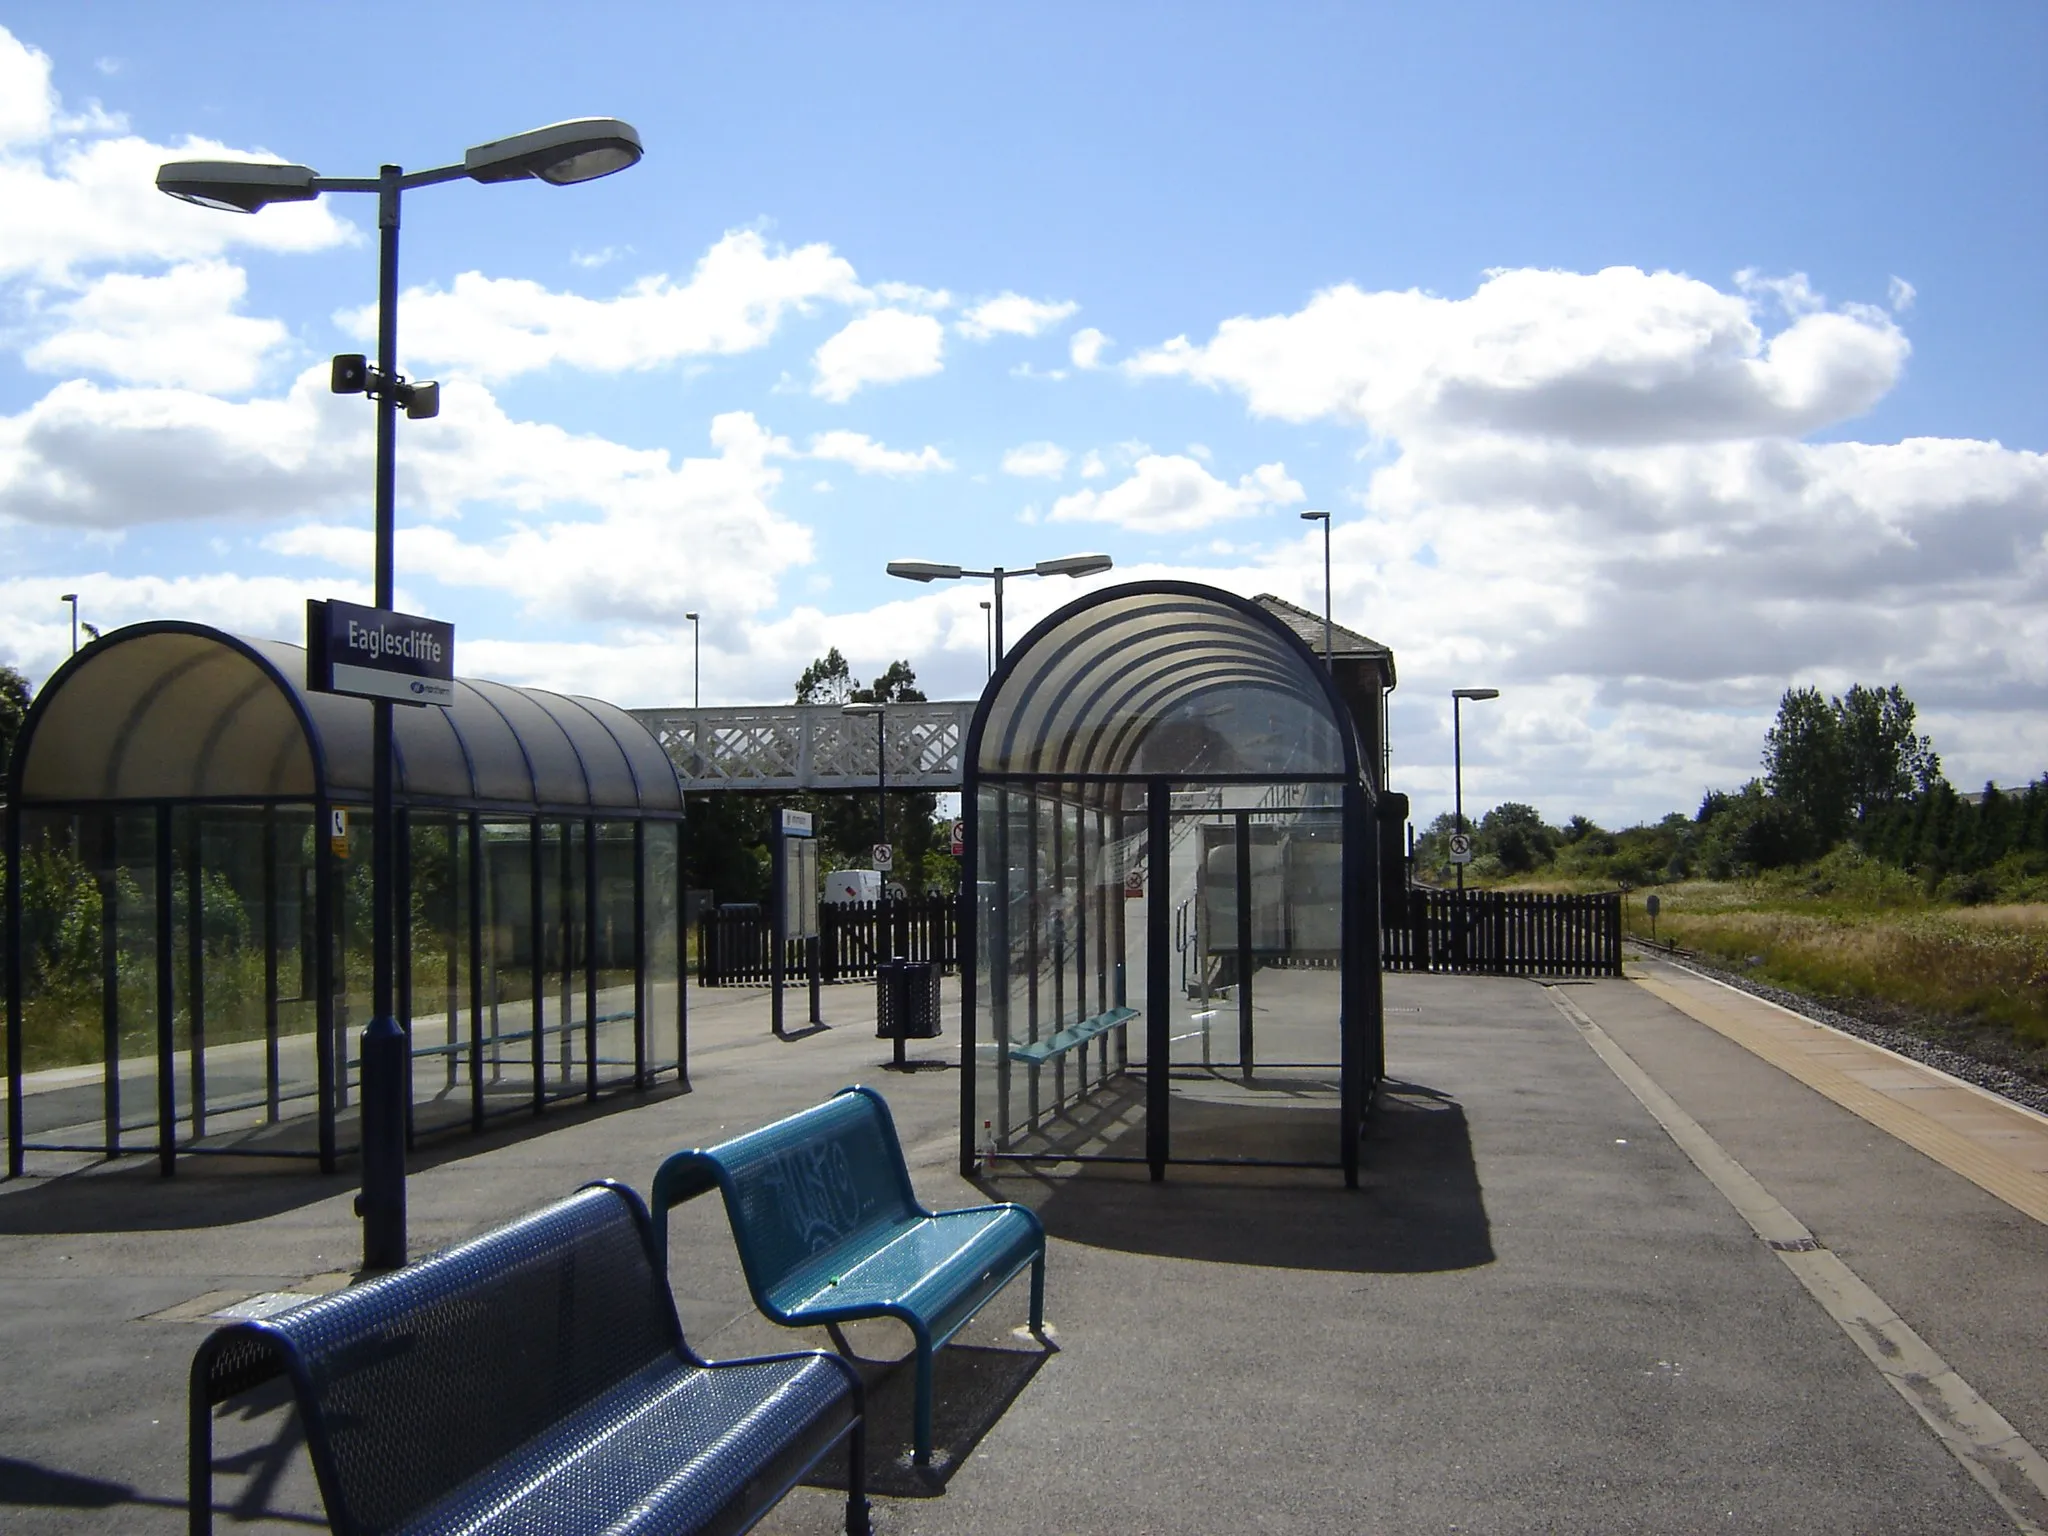 Photo showing: Seats and shelters at Eaglescliffe railway station